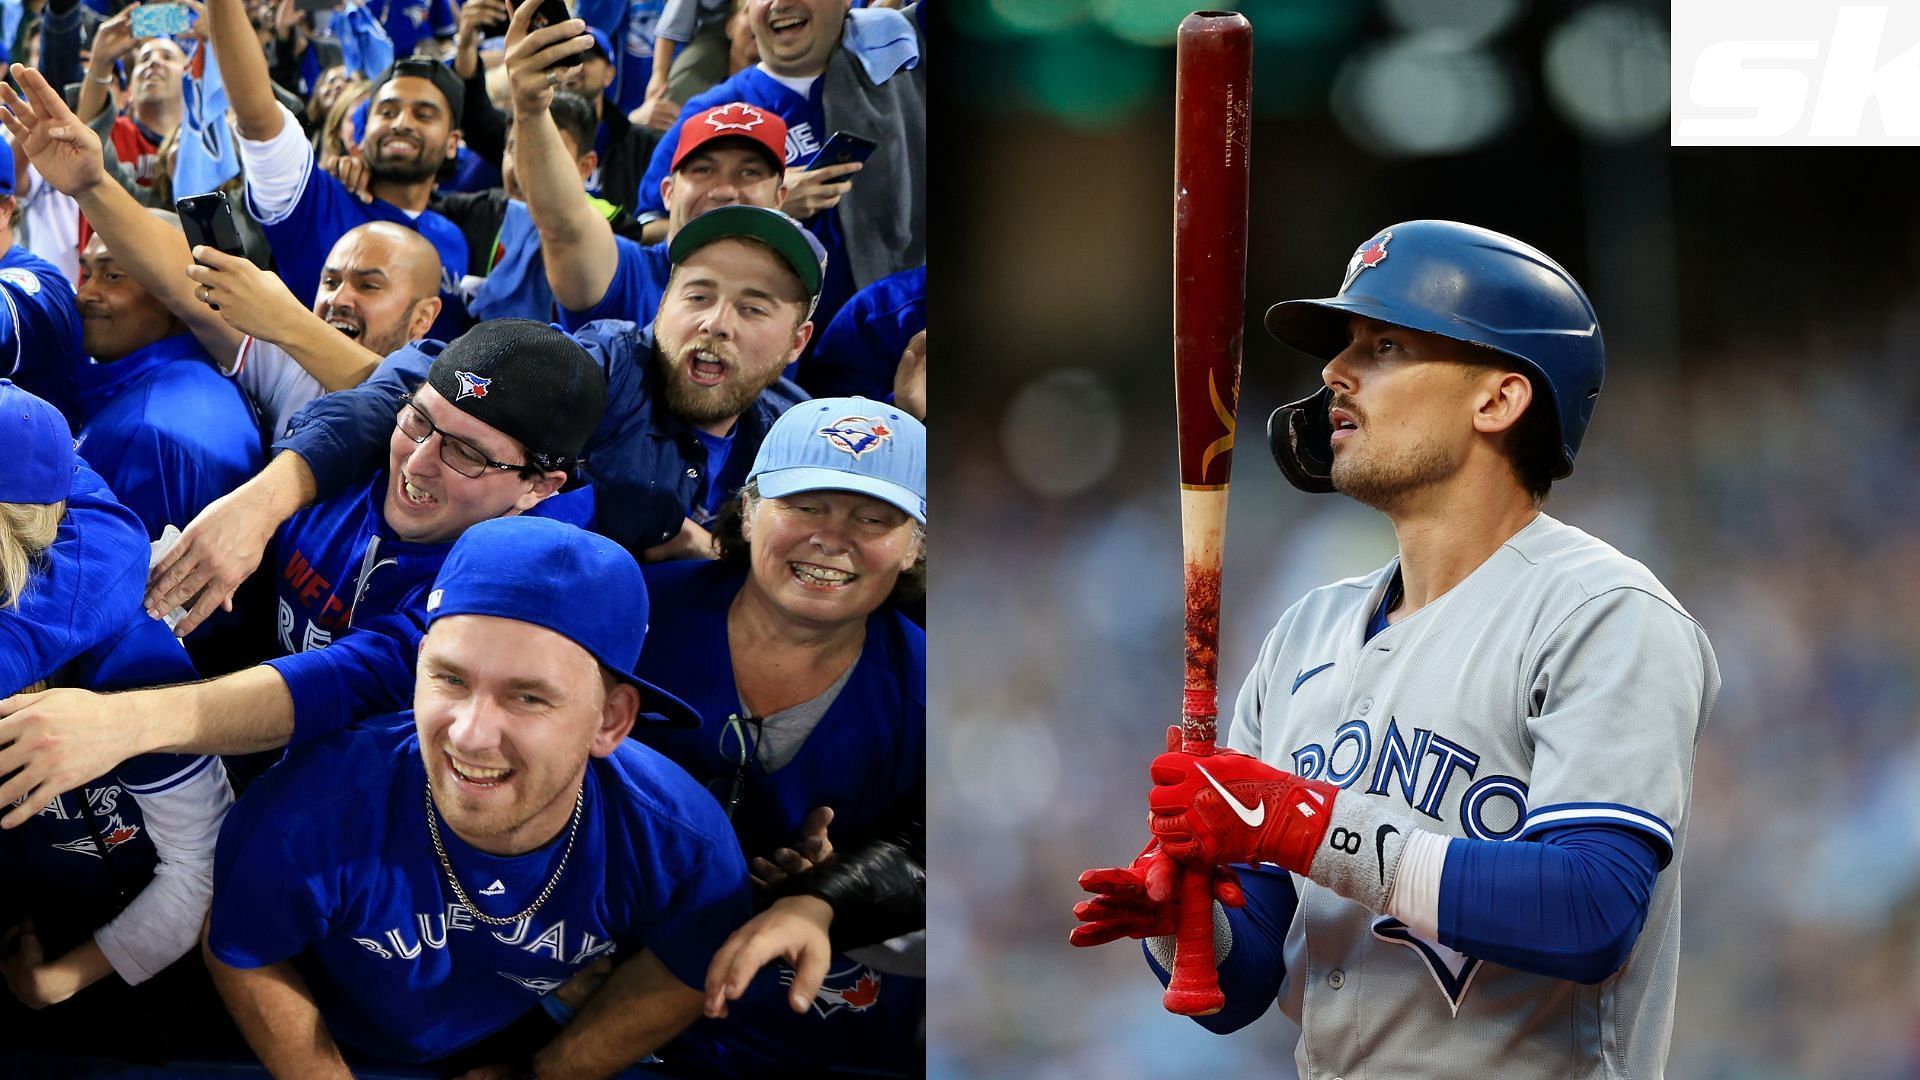 Fans are loving the recent play of Jays